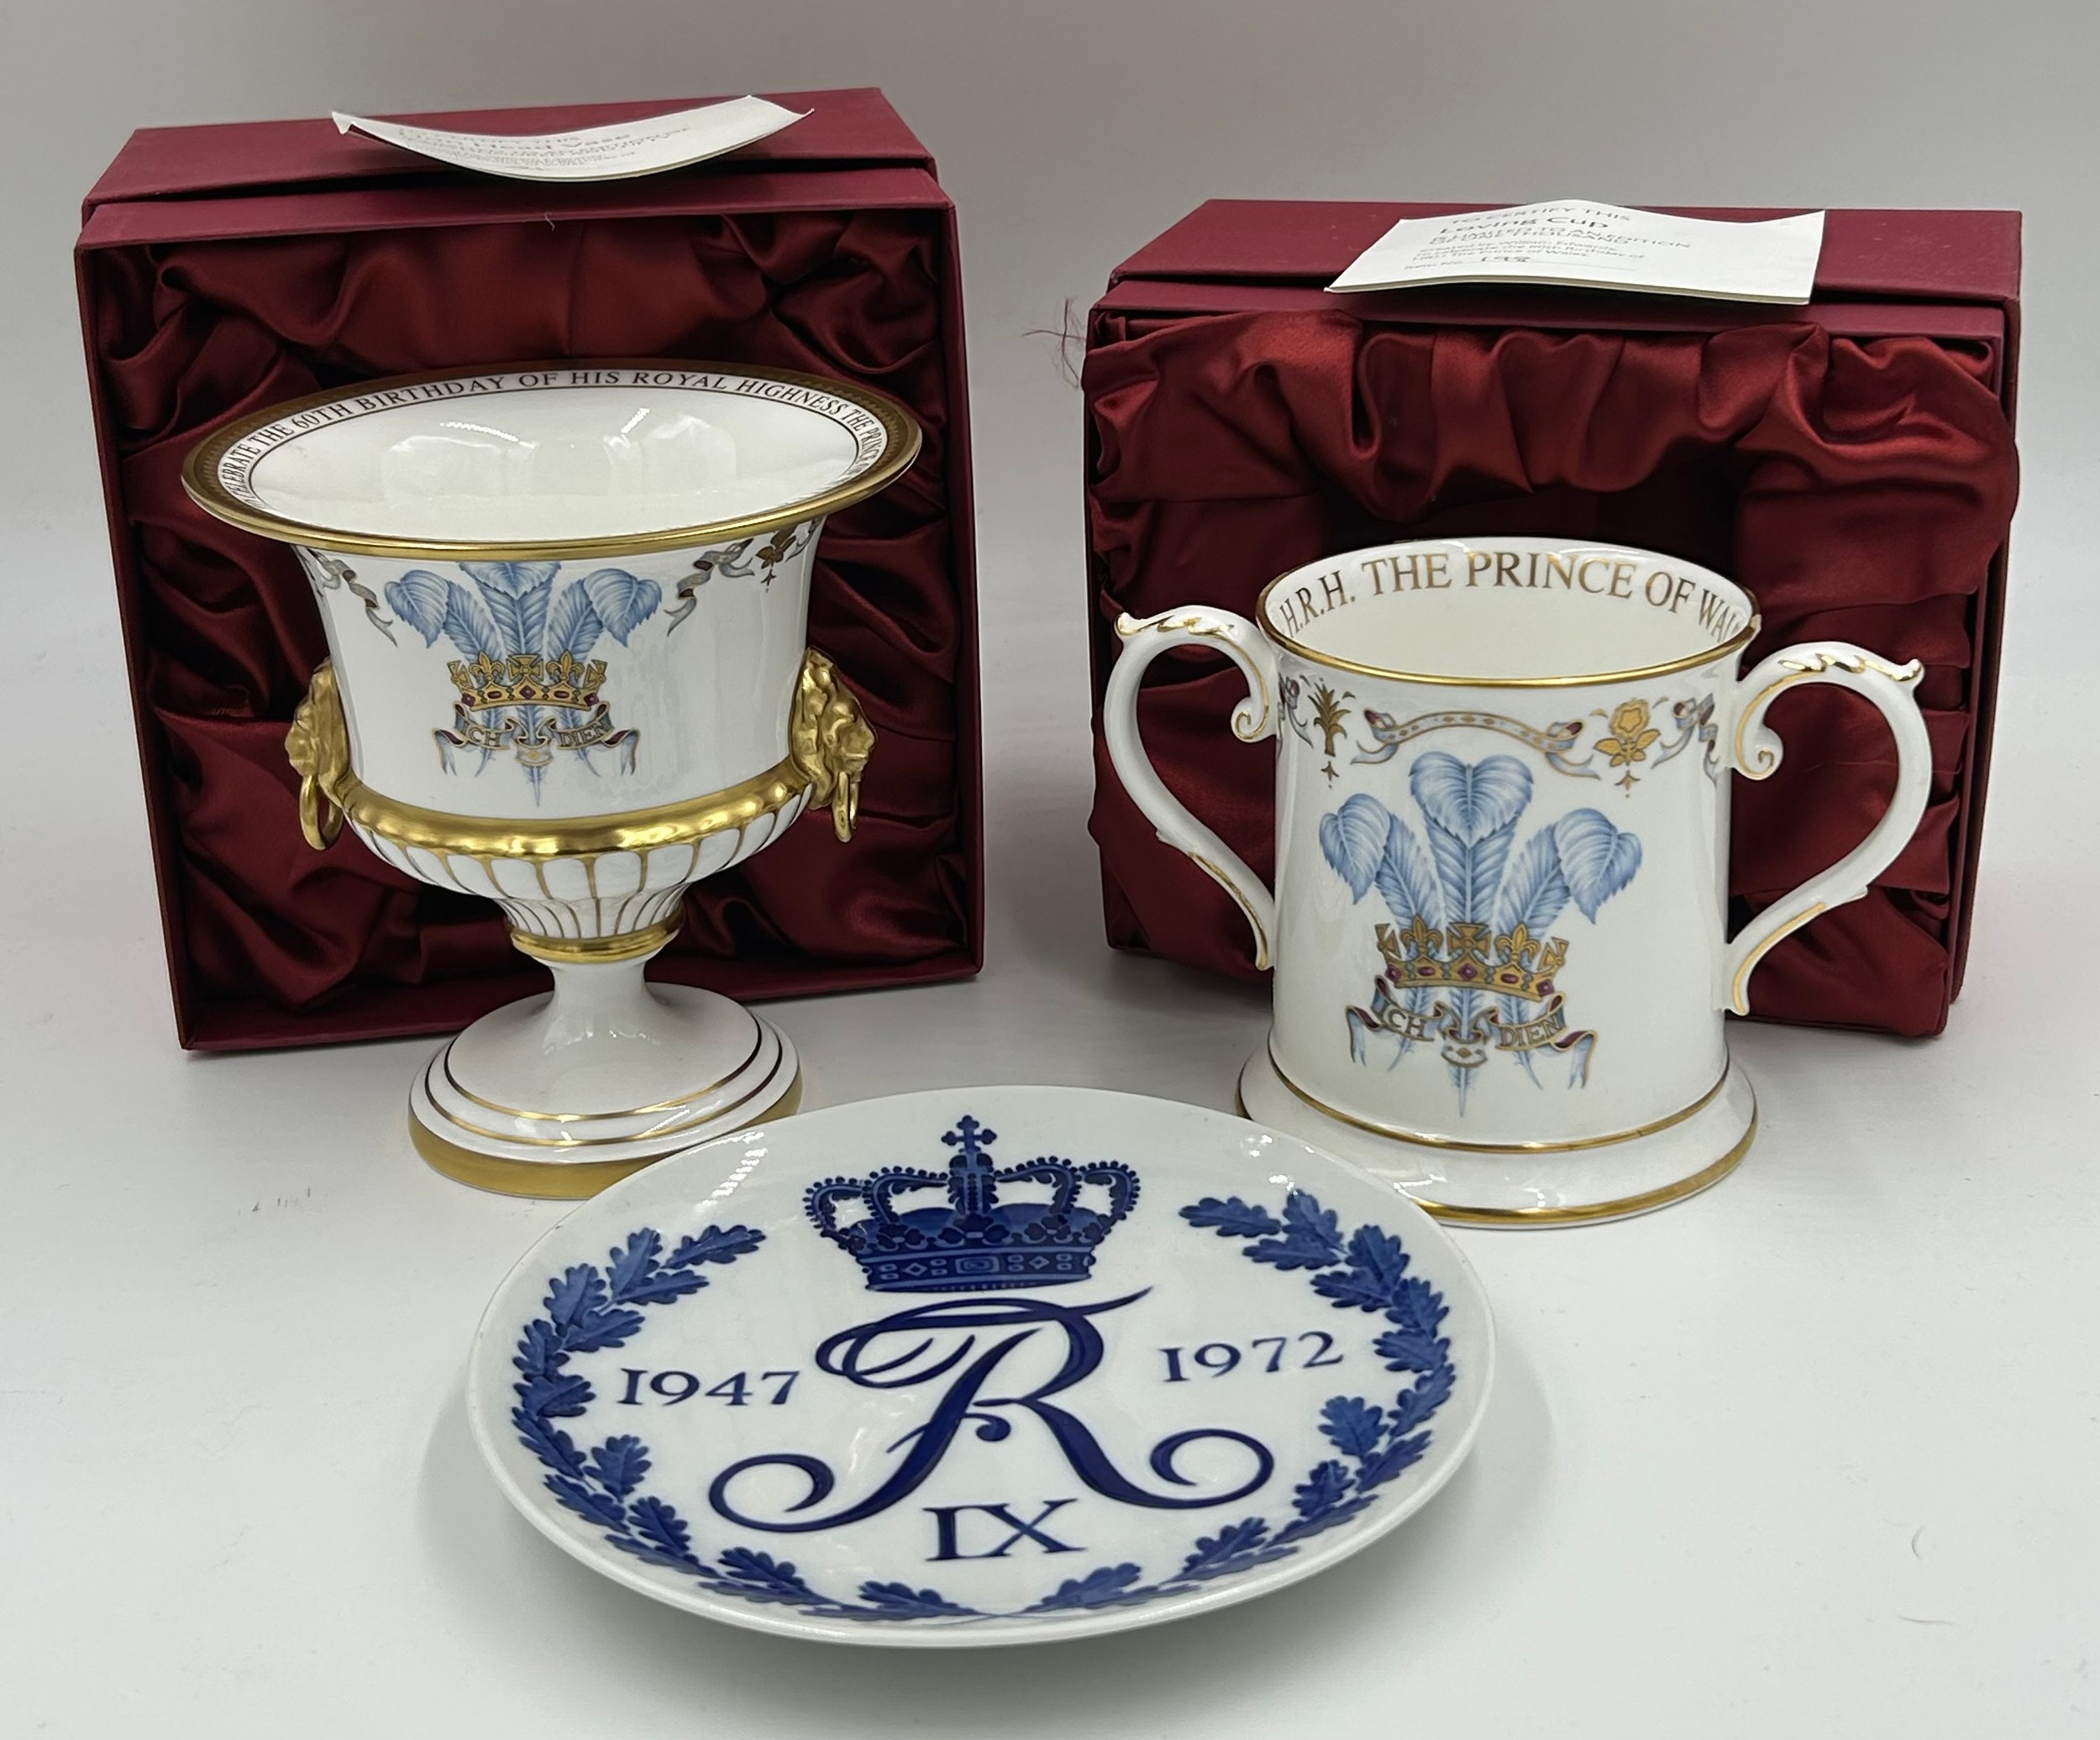 Two items of Commemorative Highgrove for the 60th birthday of the Charles Prince of Wales both